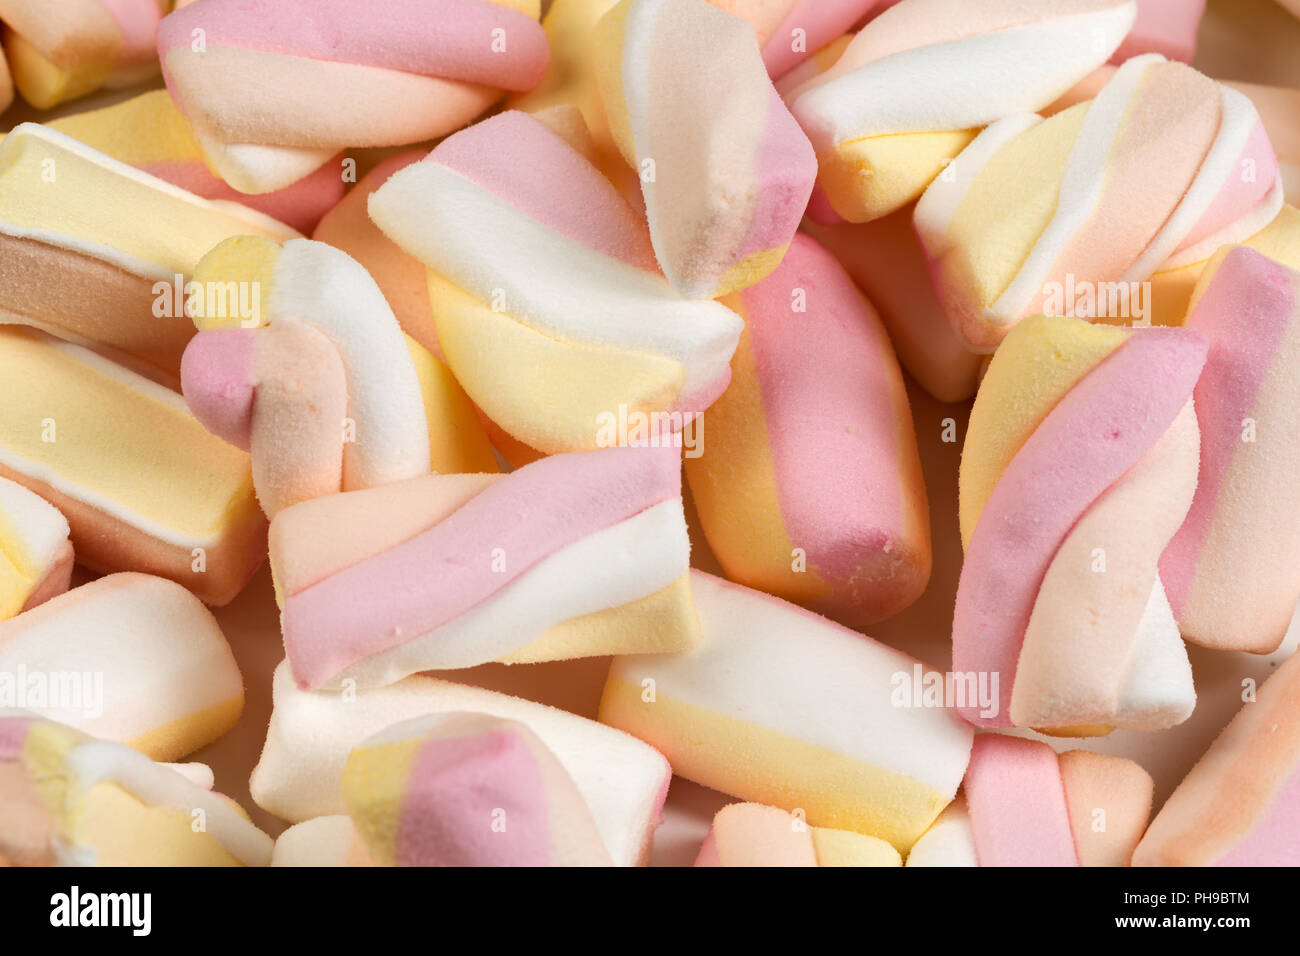 Background of the chewy sweets. Stock Photo